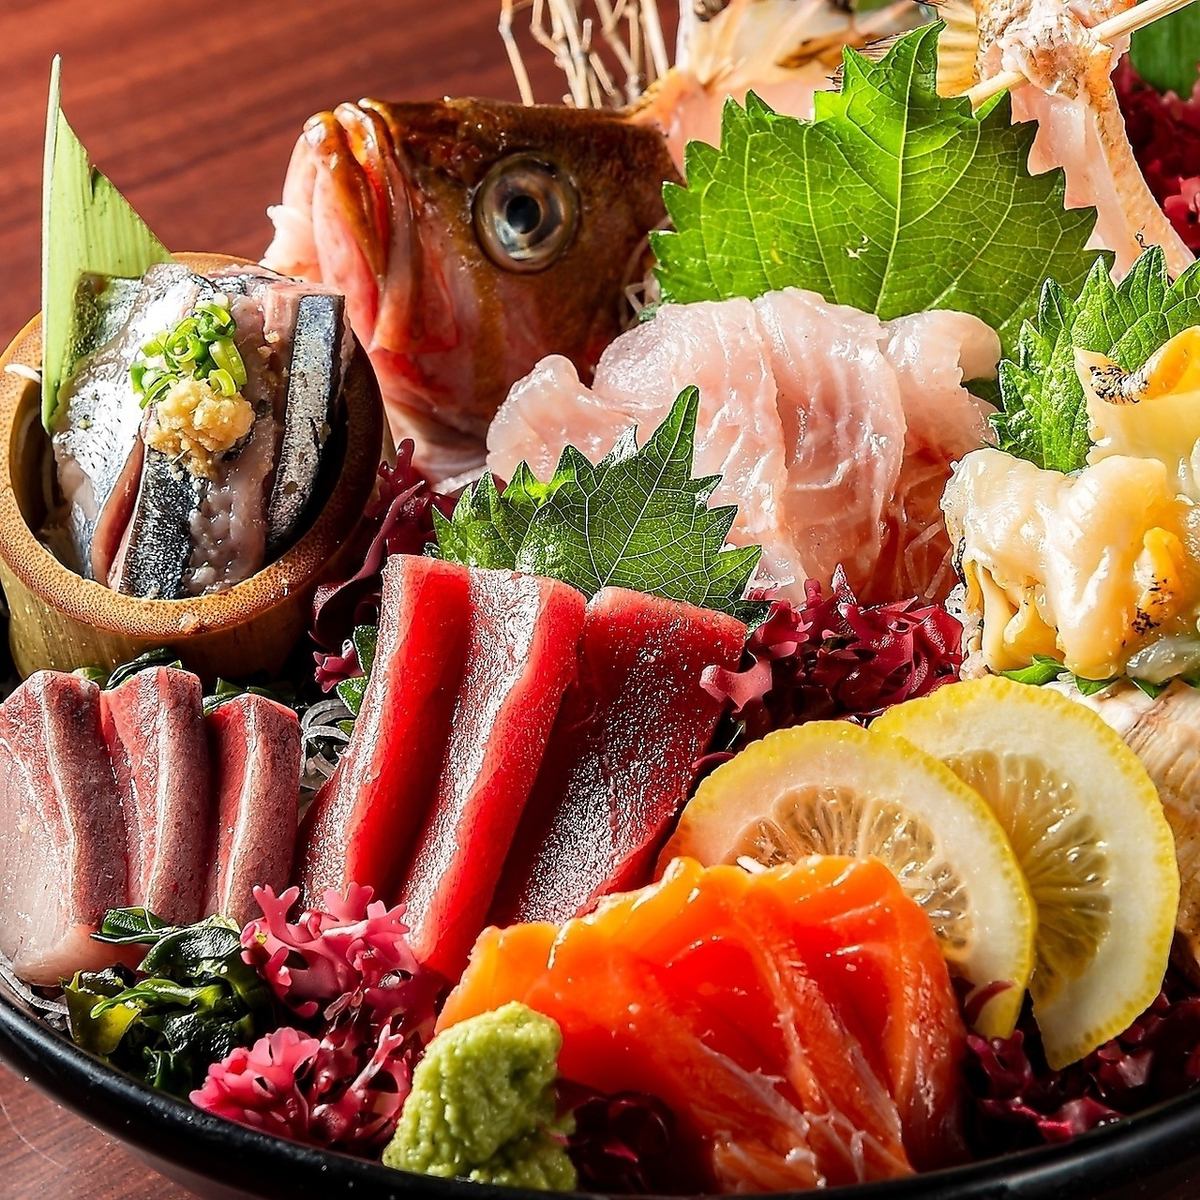 Enjoy the colorful and beautiful appearance and the delicious flavor of extremely fresh sashimi!